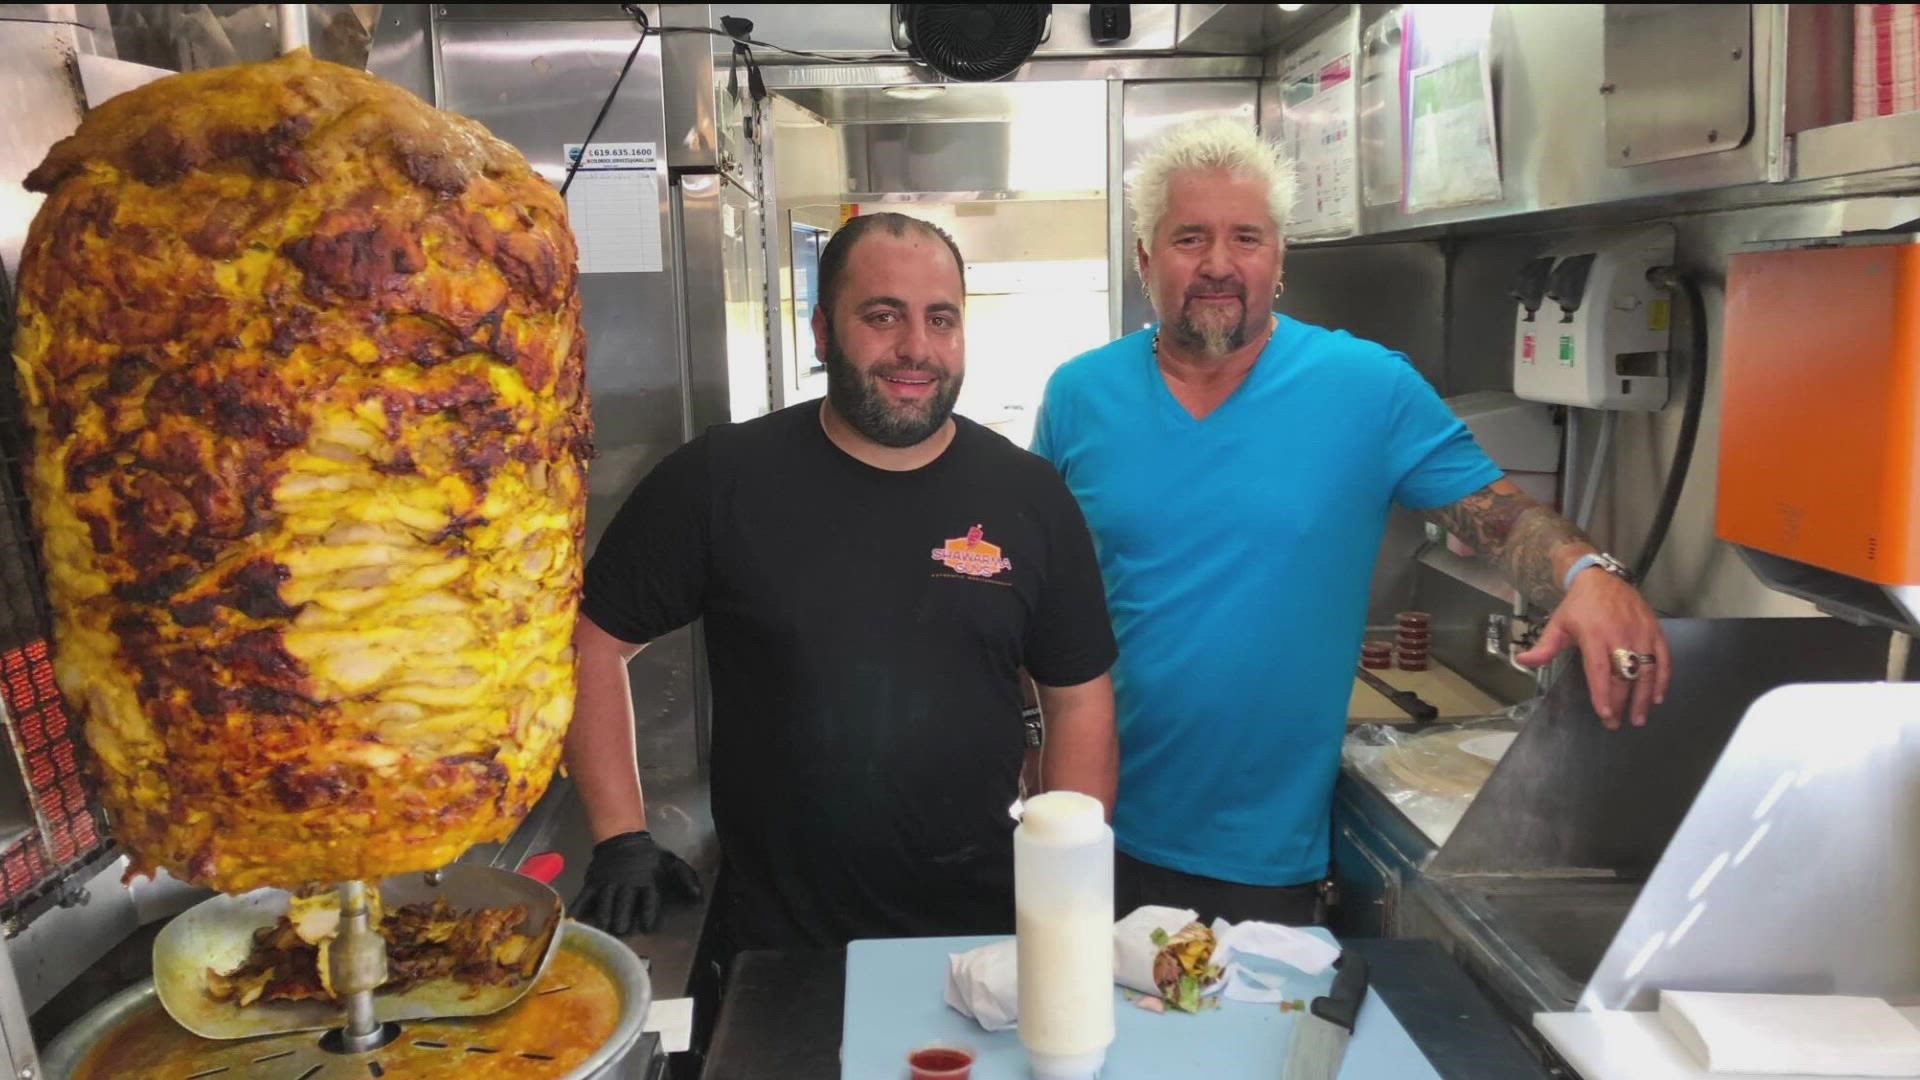 "It was like one of my dreams to be on that show," said Shawarma Guy's owner Bryan Zeto.